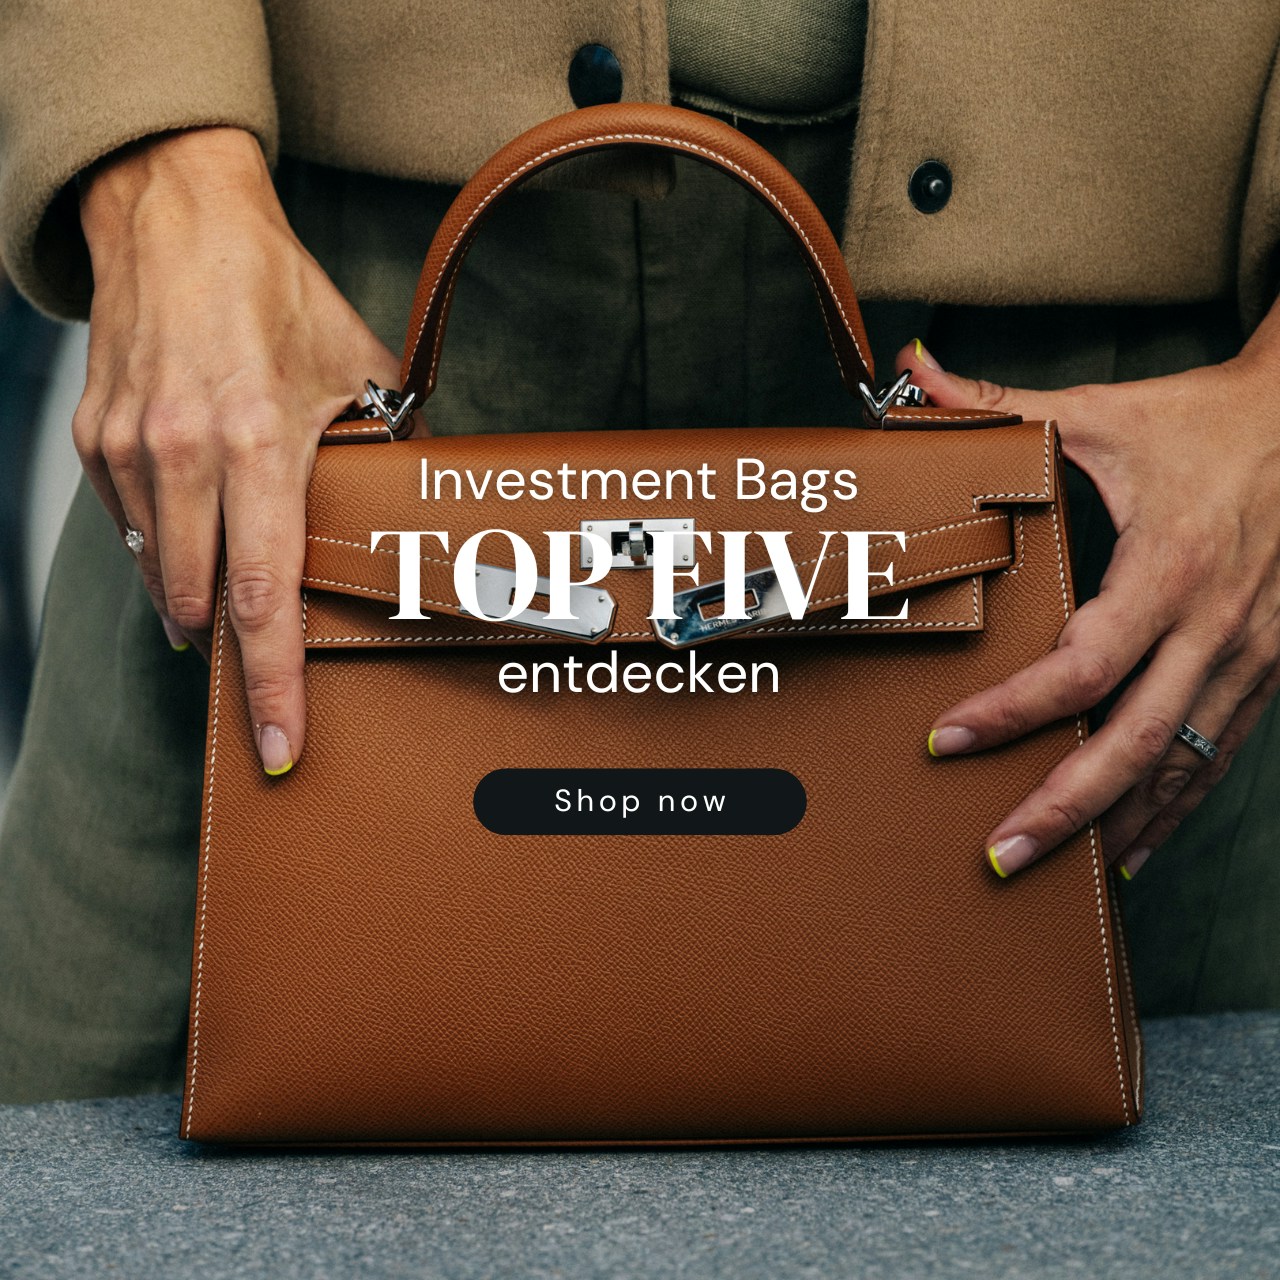 Top 5 Investment Bags